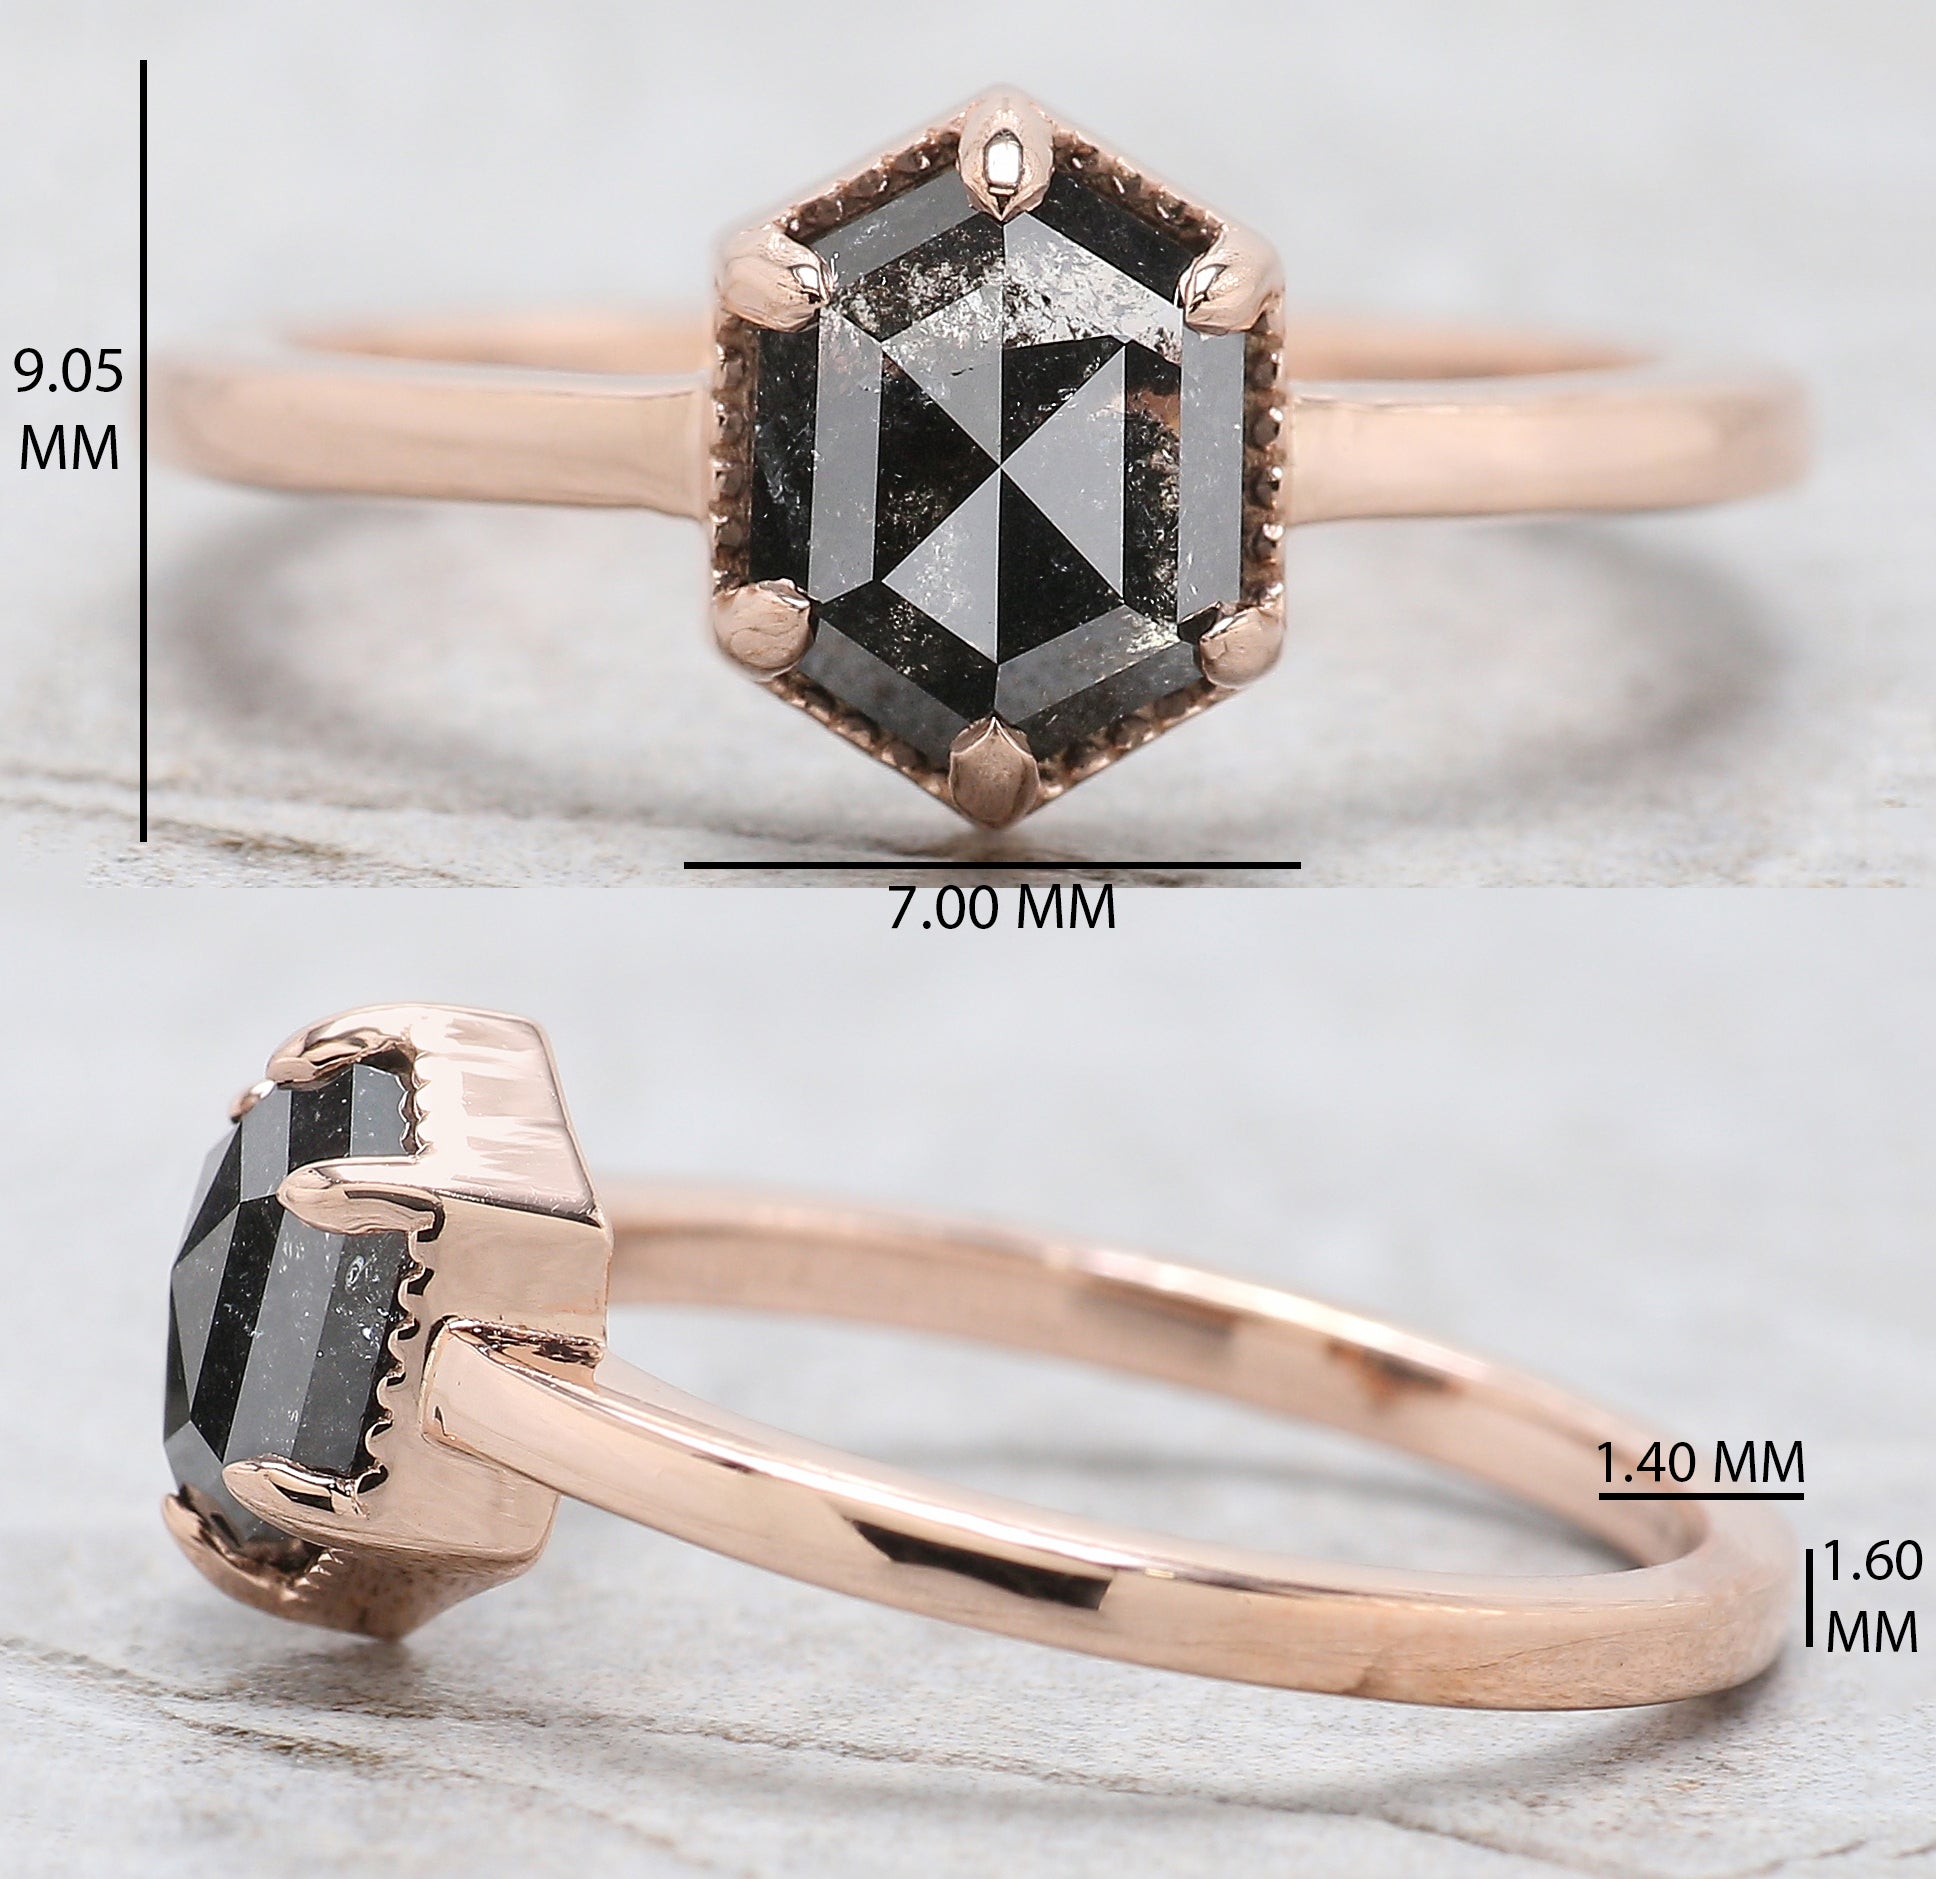 Hexagon Cut Salt And Pepper Diamond Ring 1.43 Ct 7.65 MM Hexagon Diamond Ring 14K Solid Rose Gold Silver Engagement Ring Gift For Her QL2704